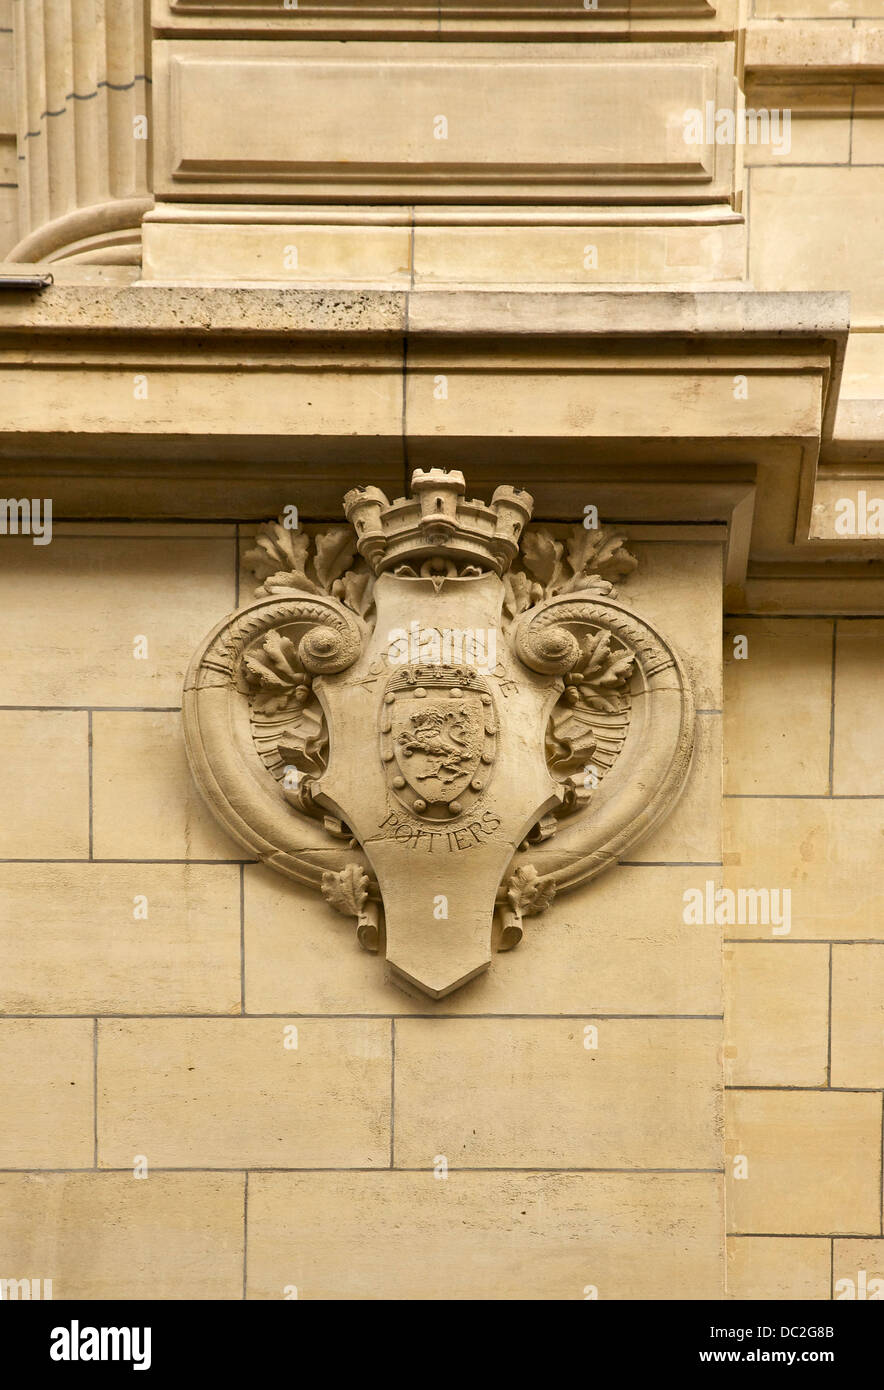 The CoA of the Academy of Poitiers, sculpted on a wall of the Sorbonne in Paris. Stock Photo